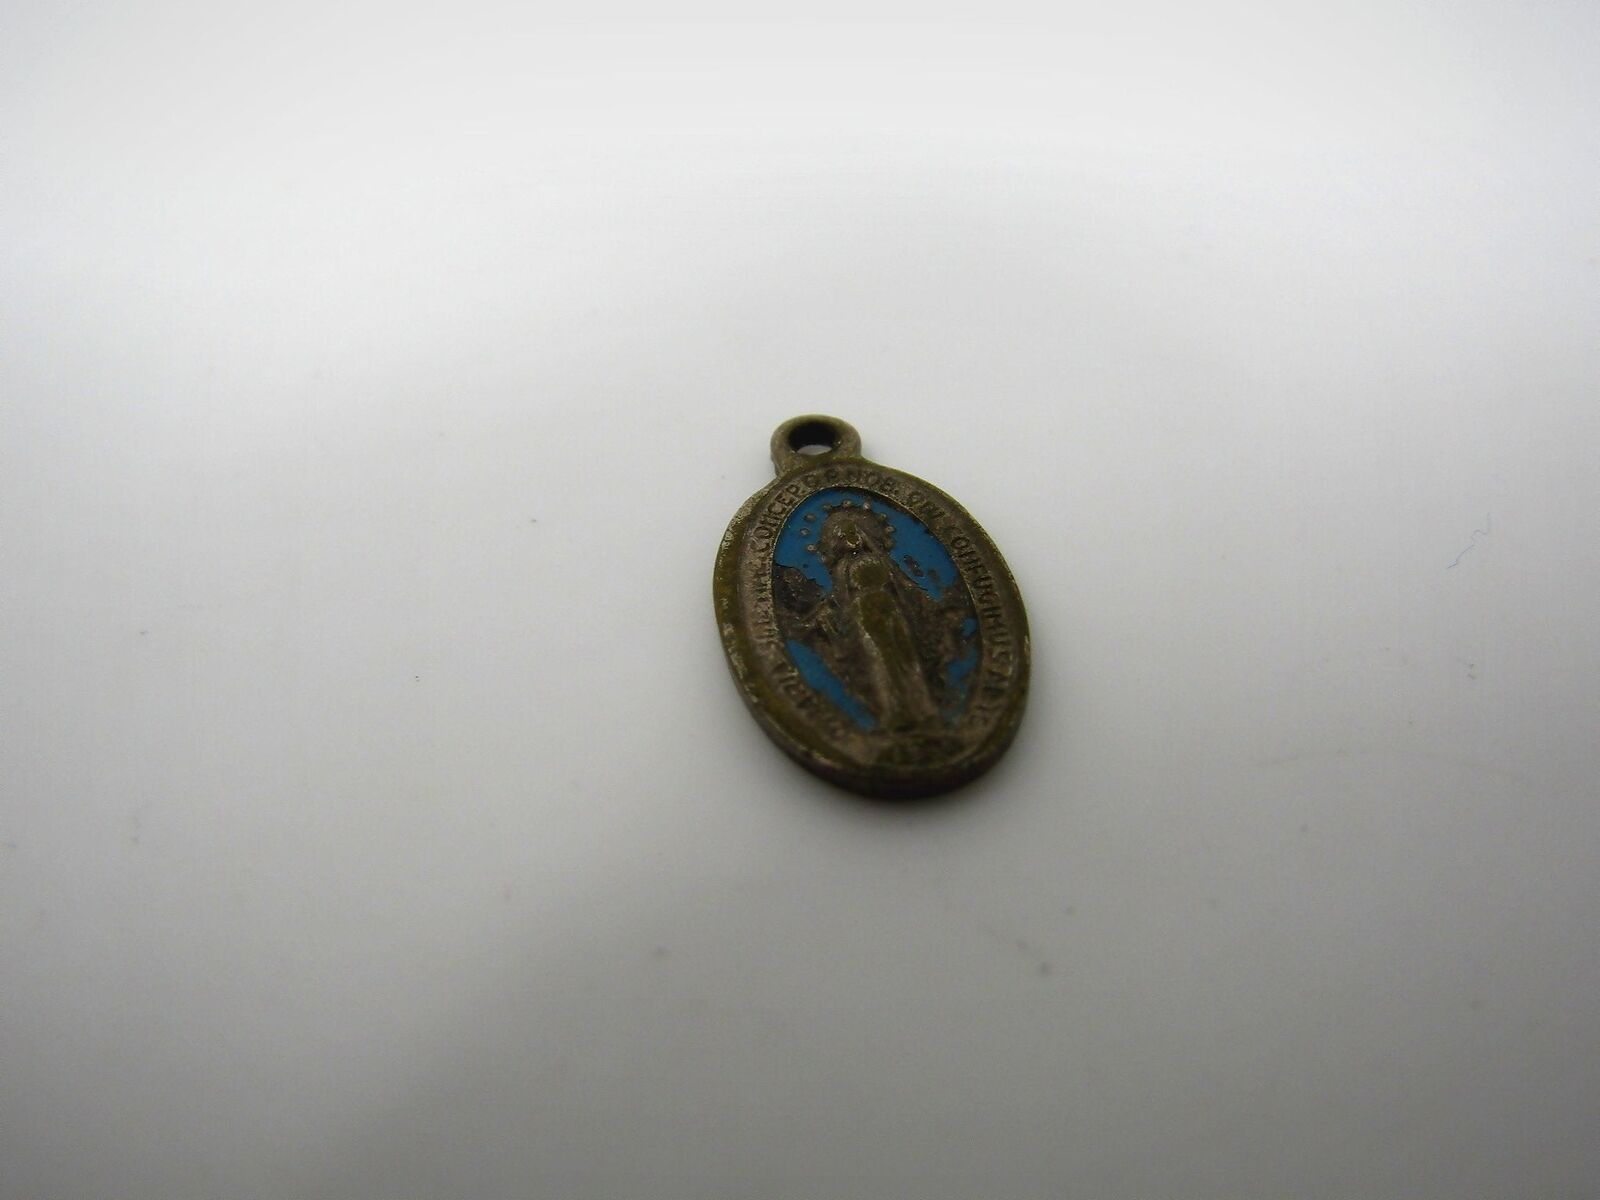 Small Vintage Mary Medal: Christian Jewelry Religious Theme